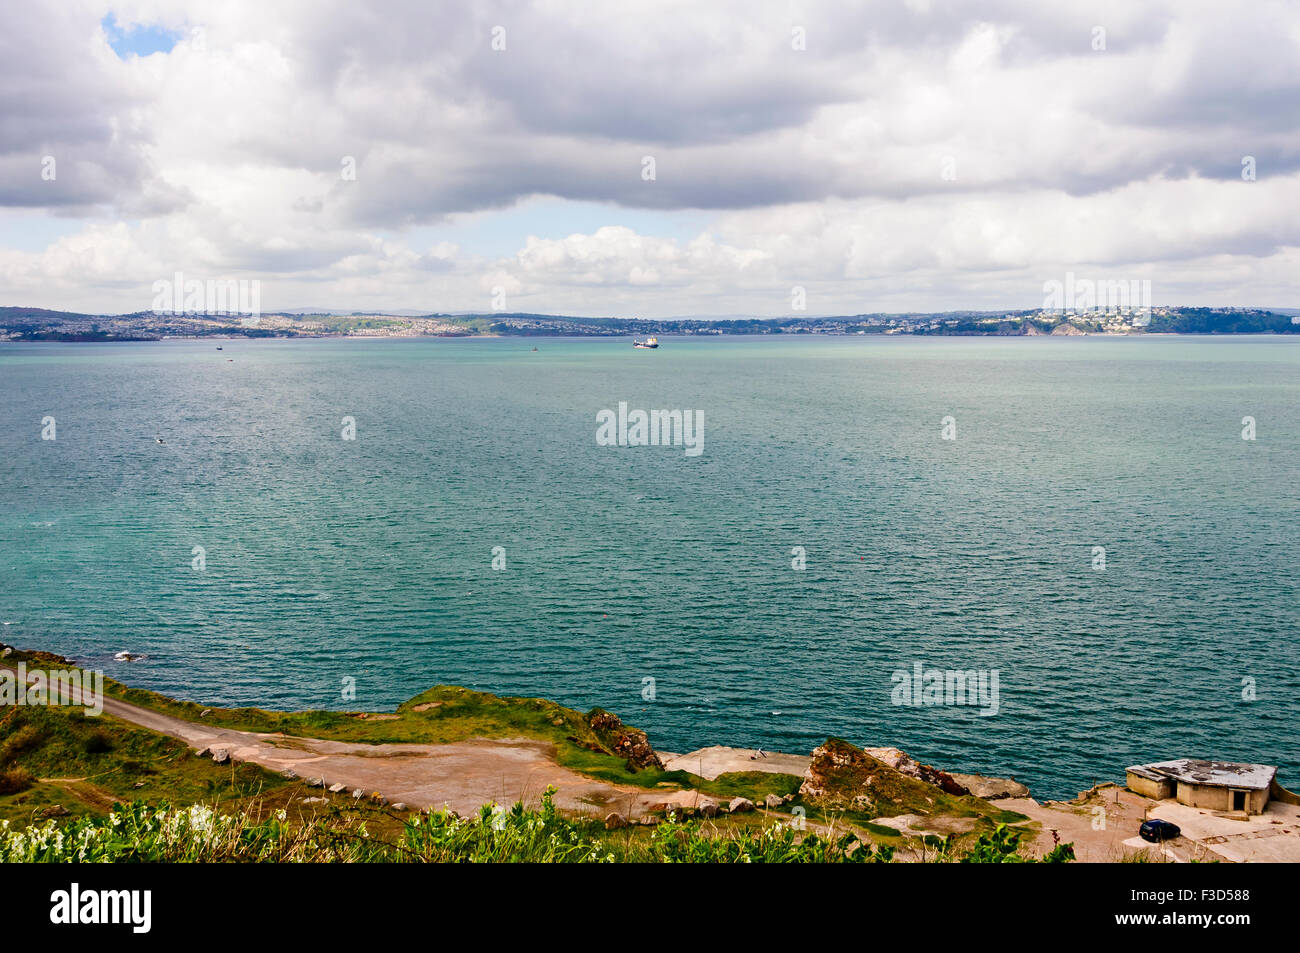 Looking across Tor Bay from the coastal headland of Berry Head at the southern end of Torbay towards the east cost of Devon Stock Photo